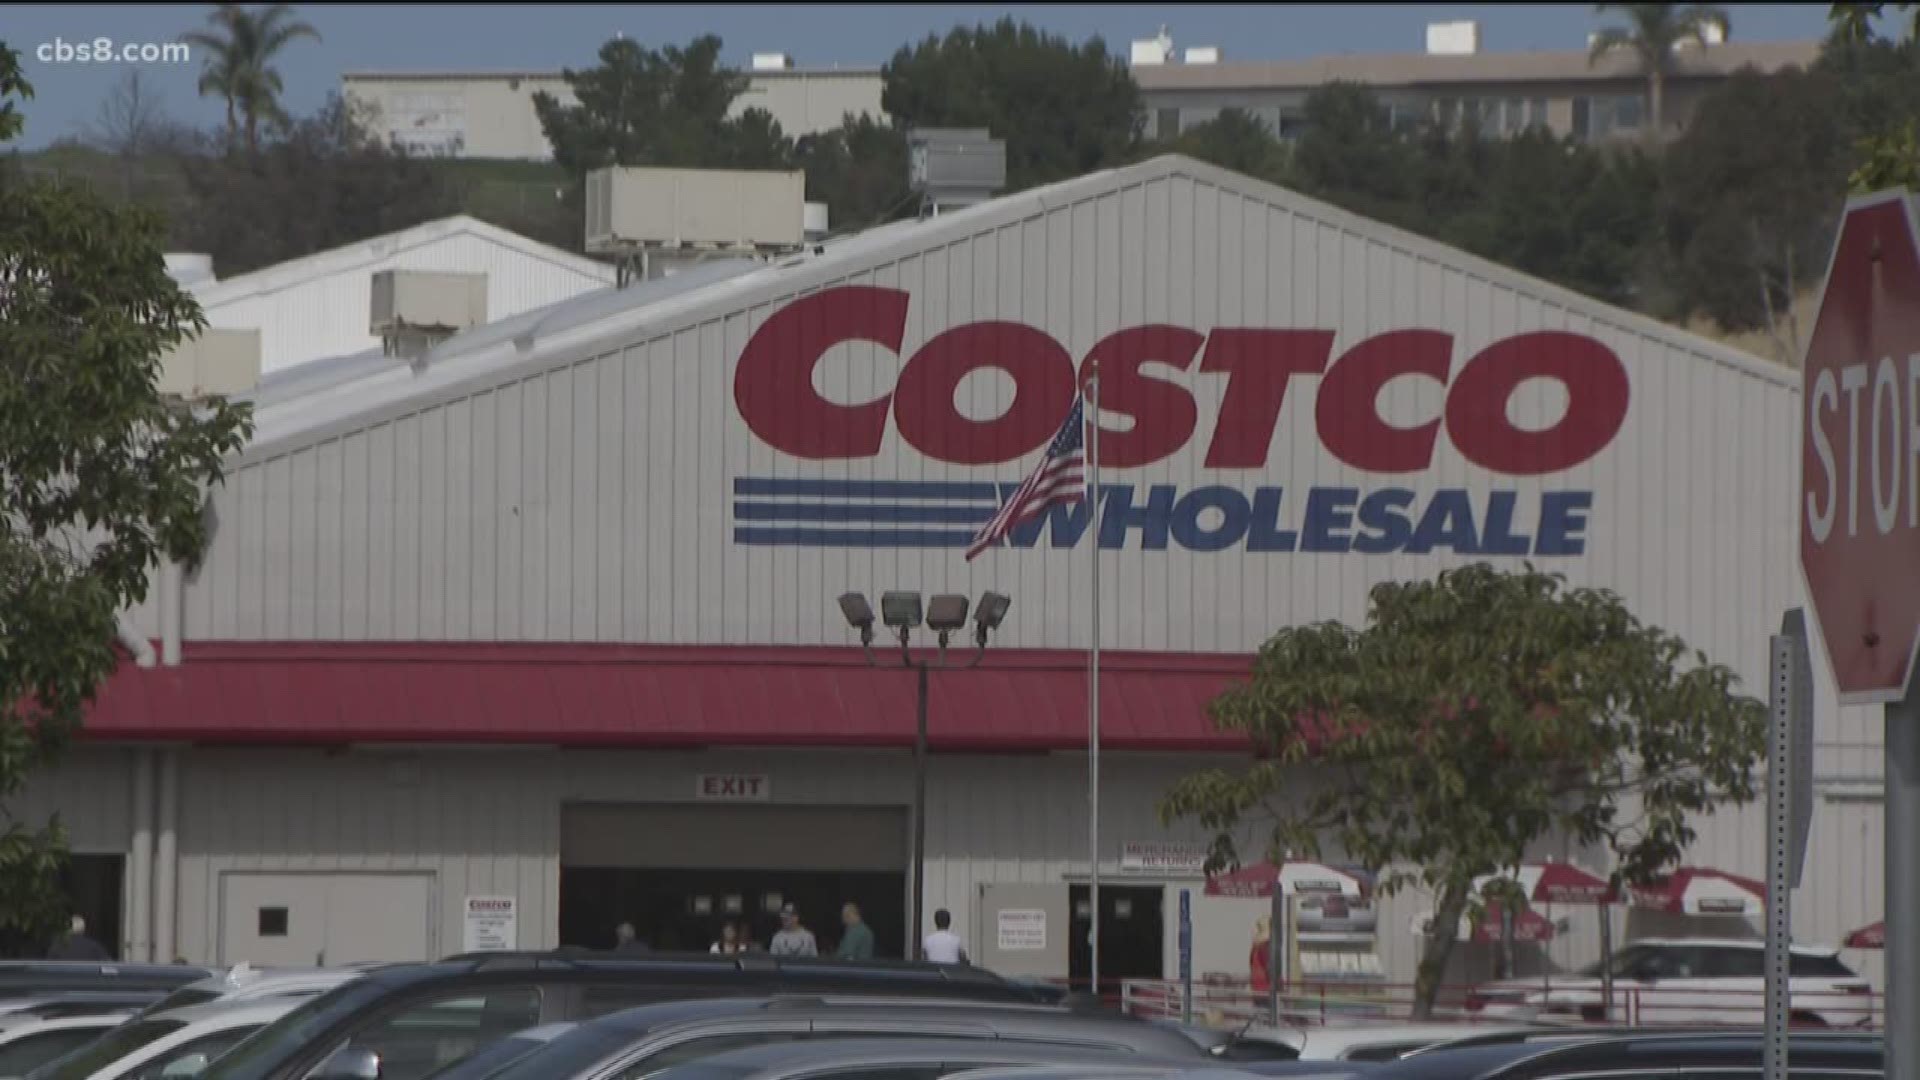 Is a Costco membership needed to buy food at its court food?